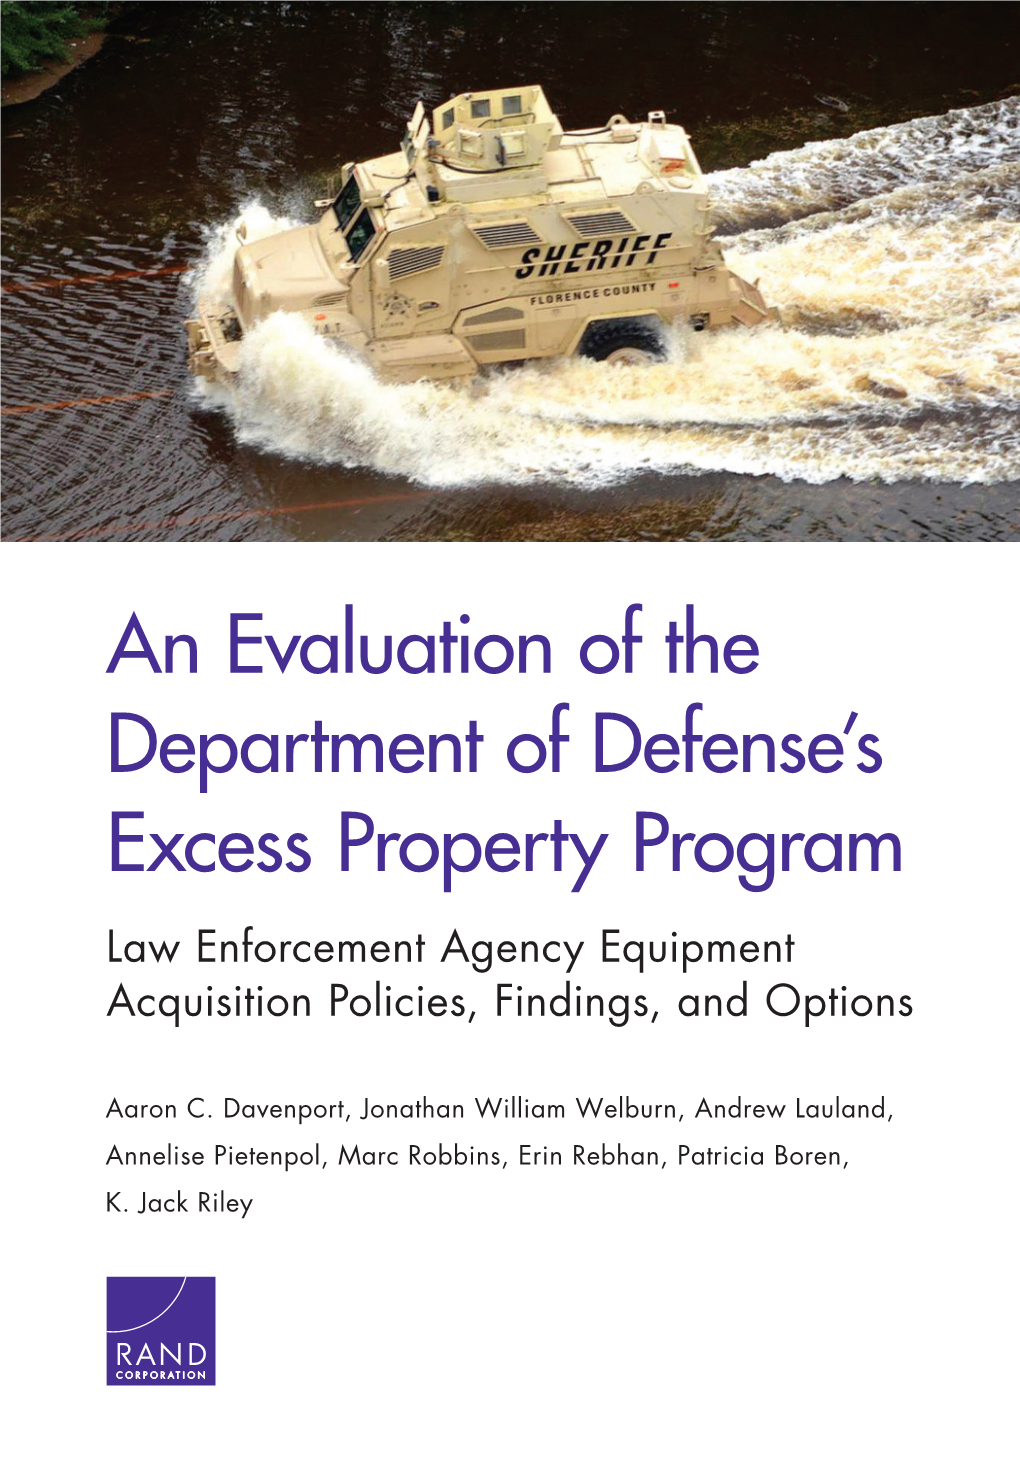 1033 Program,”2 As It Is Sometimes Called, the LESO Branch of the DLA Can Give Leas Excess Dod Property at Little Or No Cost